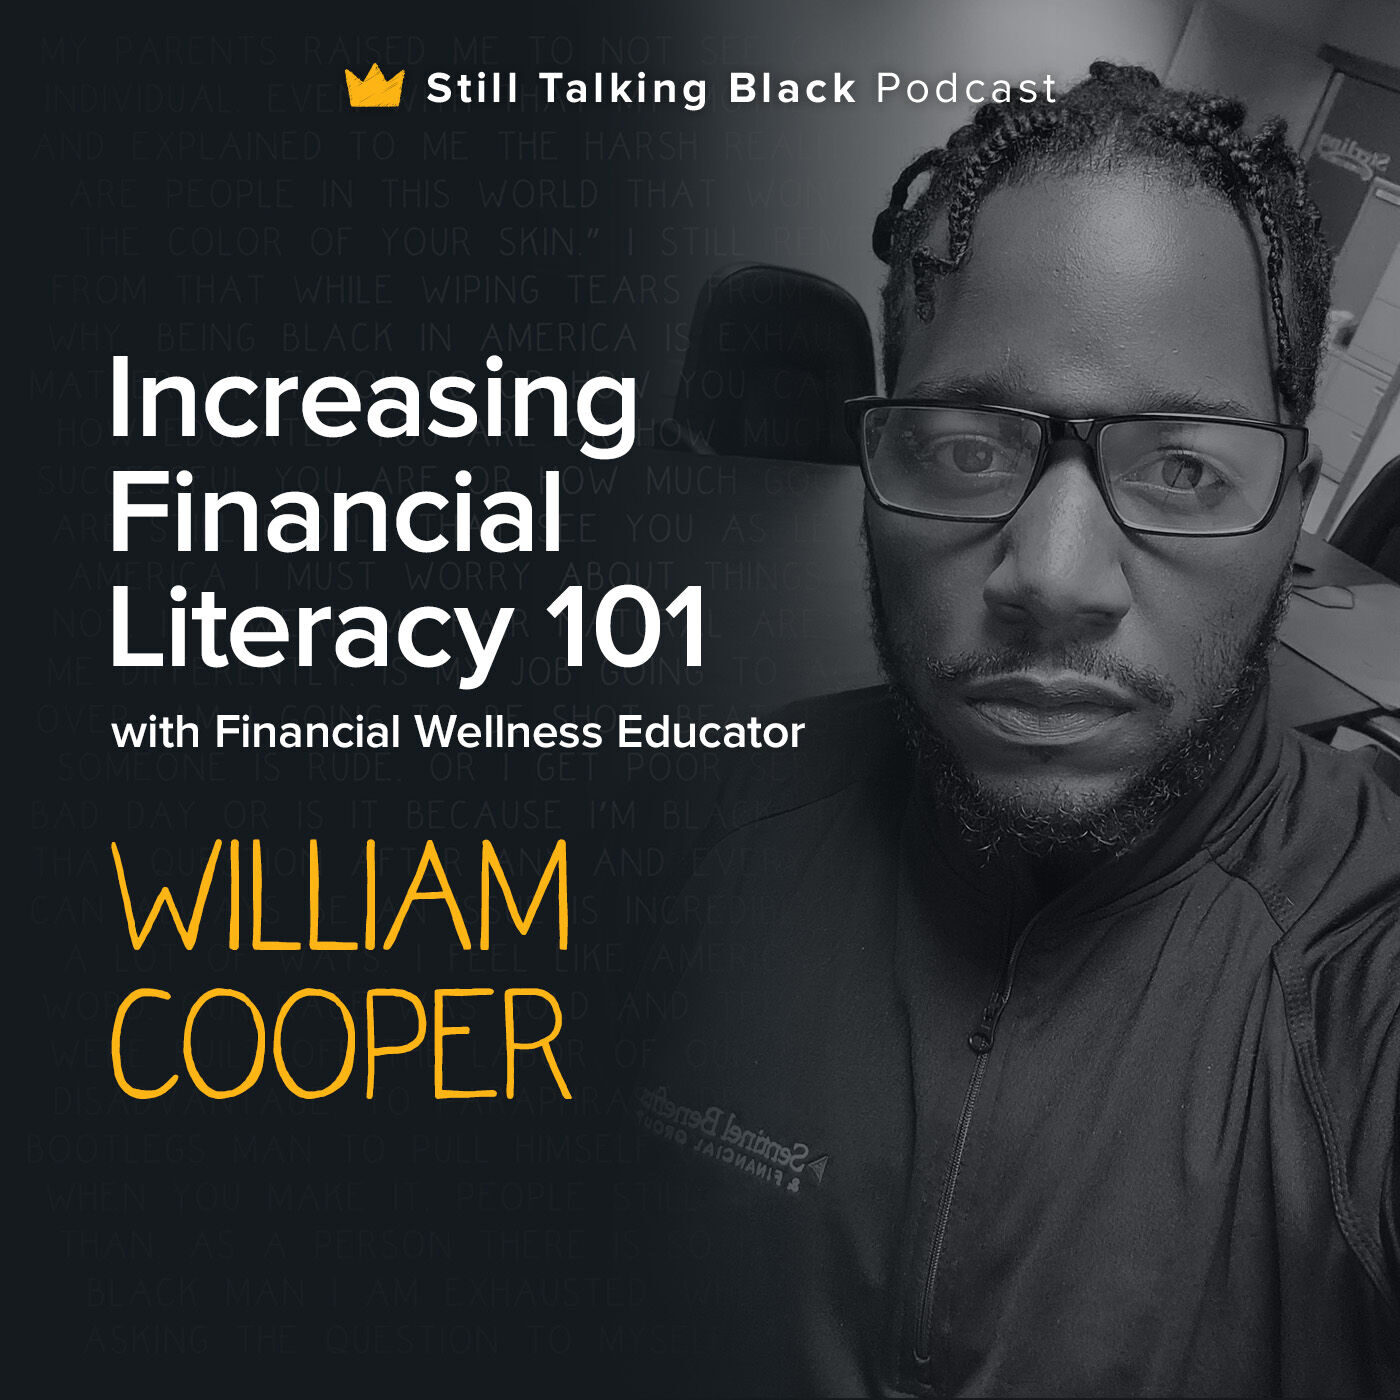 Increasing Financial Literacy 101 with Financial Wellness Educator William Cooper